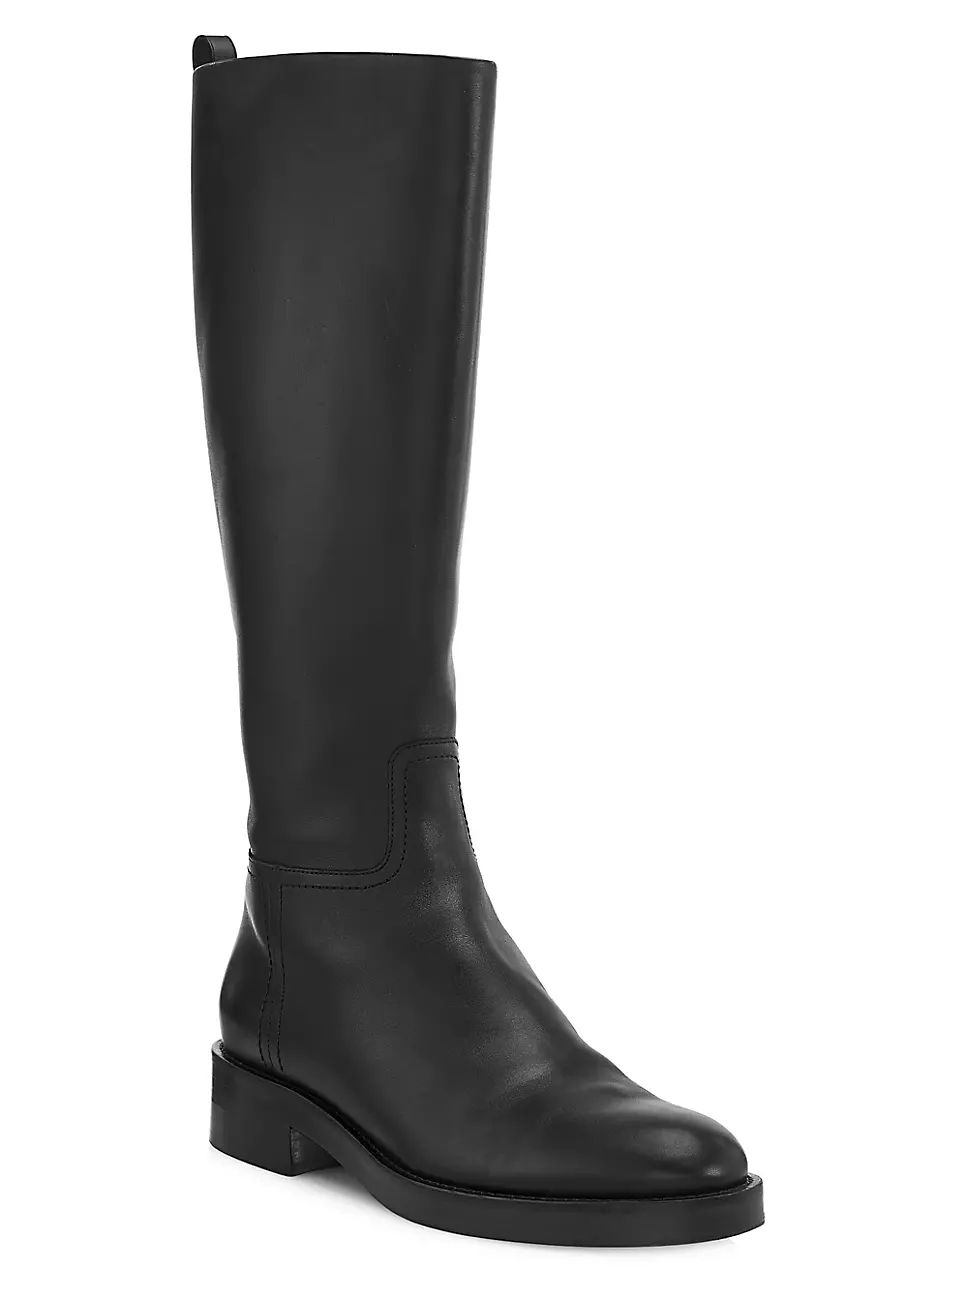 Co Co-Riding Leather Boots | Saks Fifth Avenue